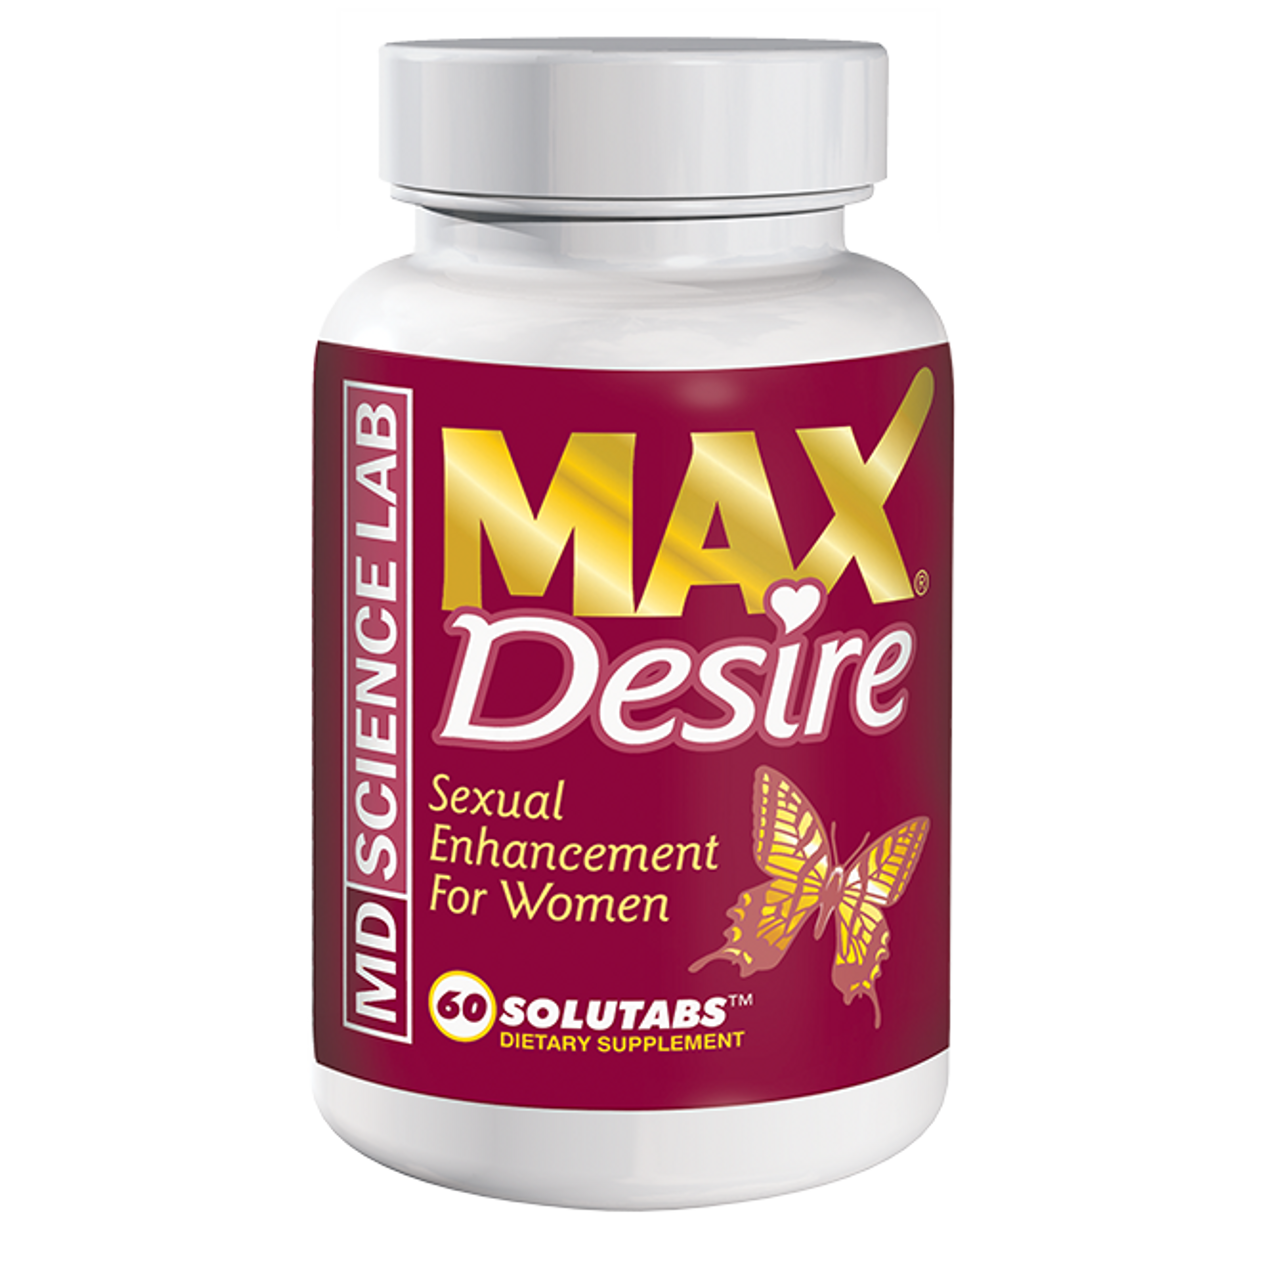 Max Desire Sexual Enhancement for Women 60ct by MD Science Lab